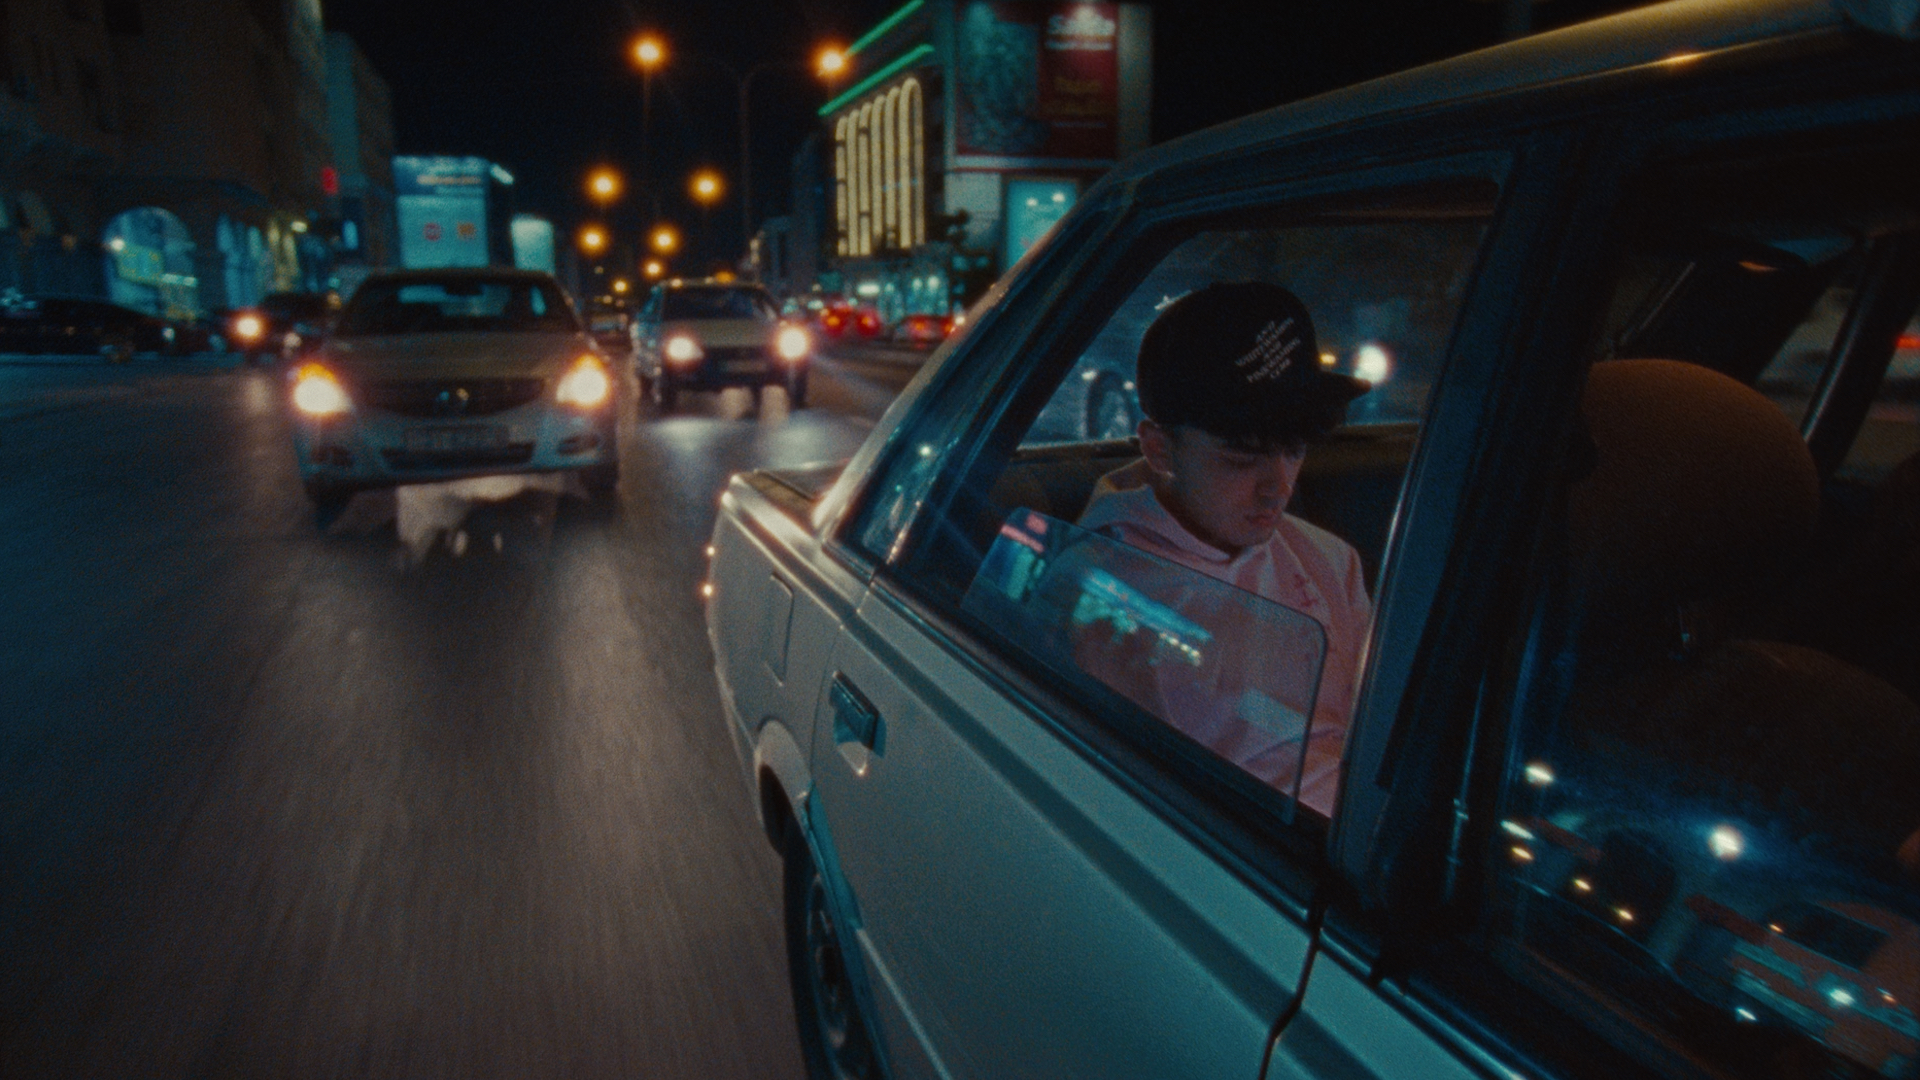 A young man sits in the back seat of a car with the window open, he wears a black cap and pink hooded sweatshirt. The car is driving down a busy street at night. Other cars follow behind with their lights on. Lit up buildings and streetlights overhead can be seen behind the car.